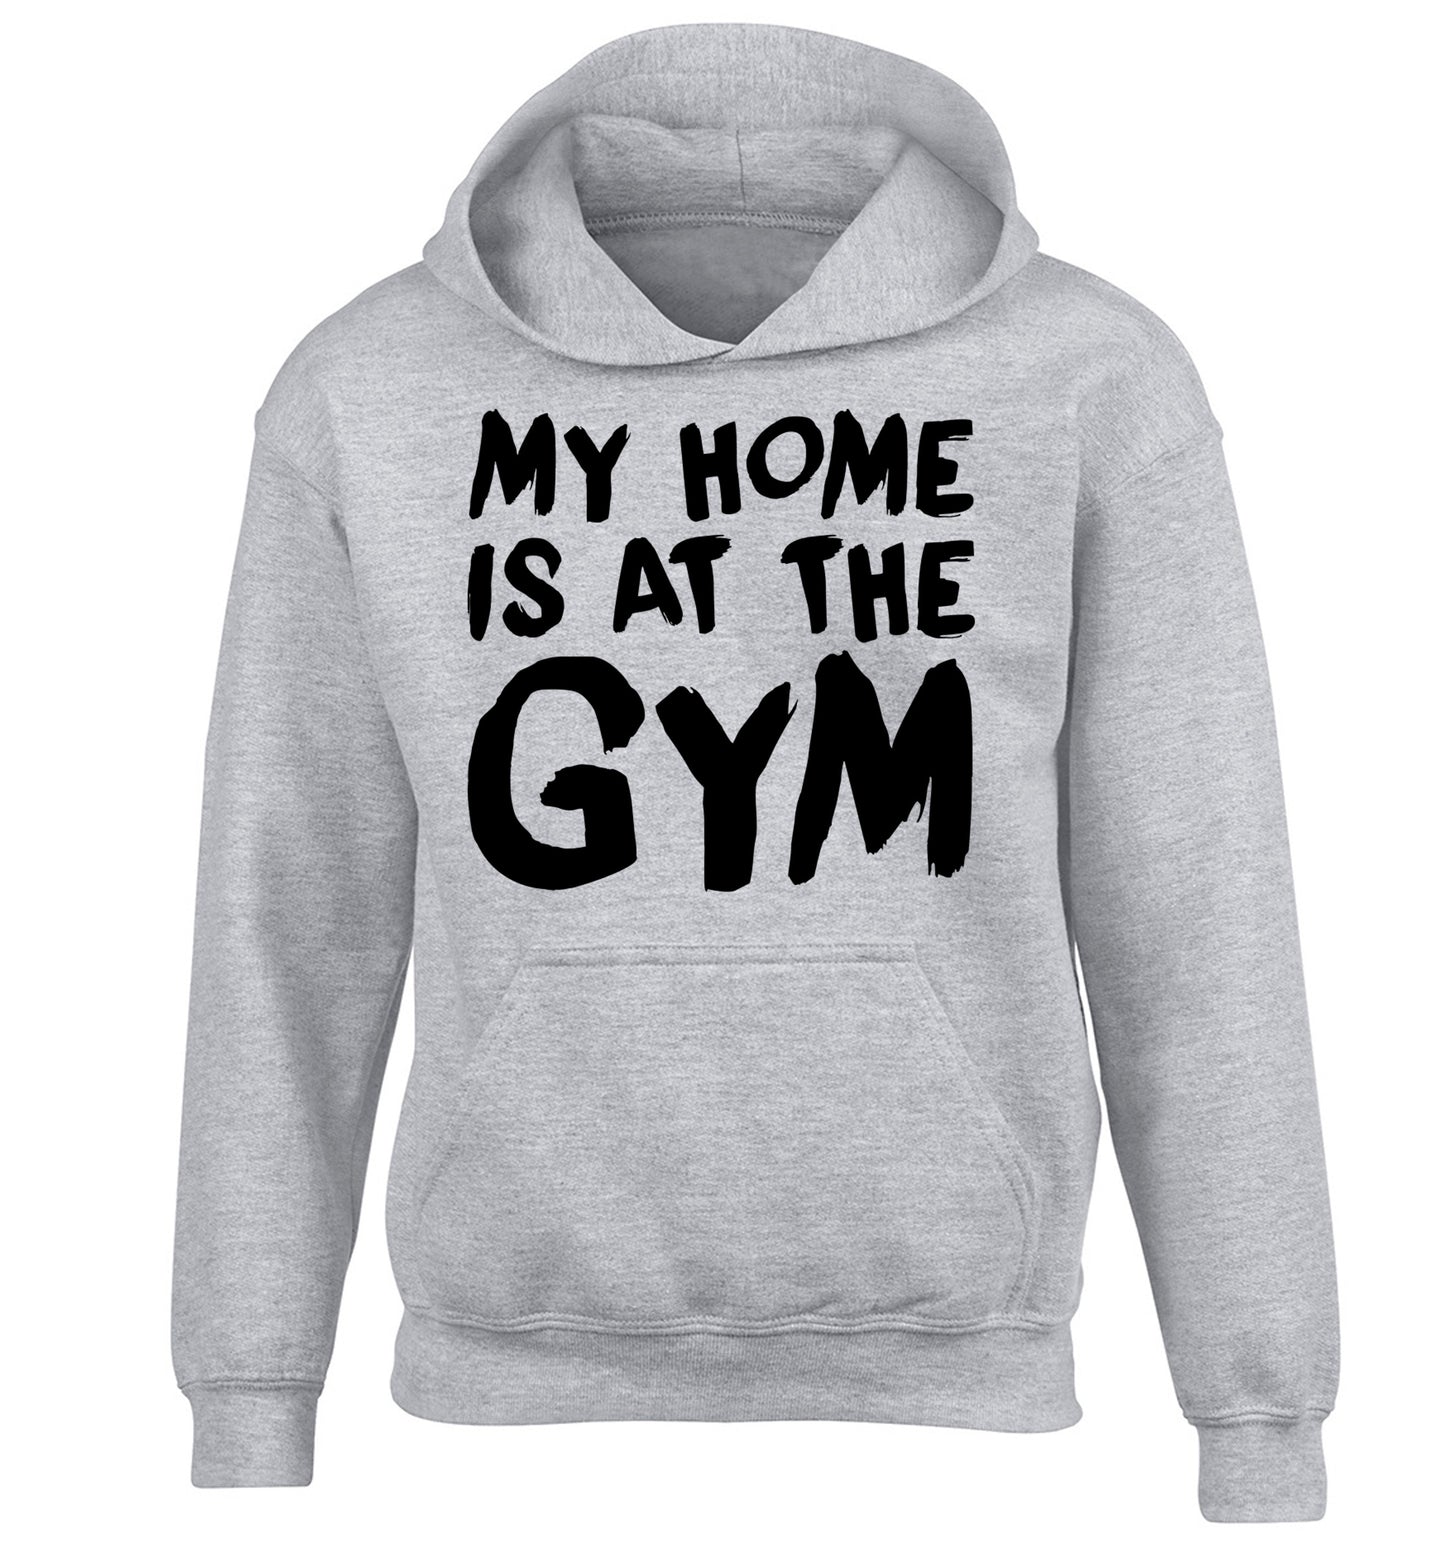 My home is at the gym children's grey hoodie 12-14 Years